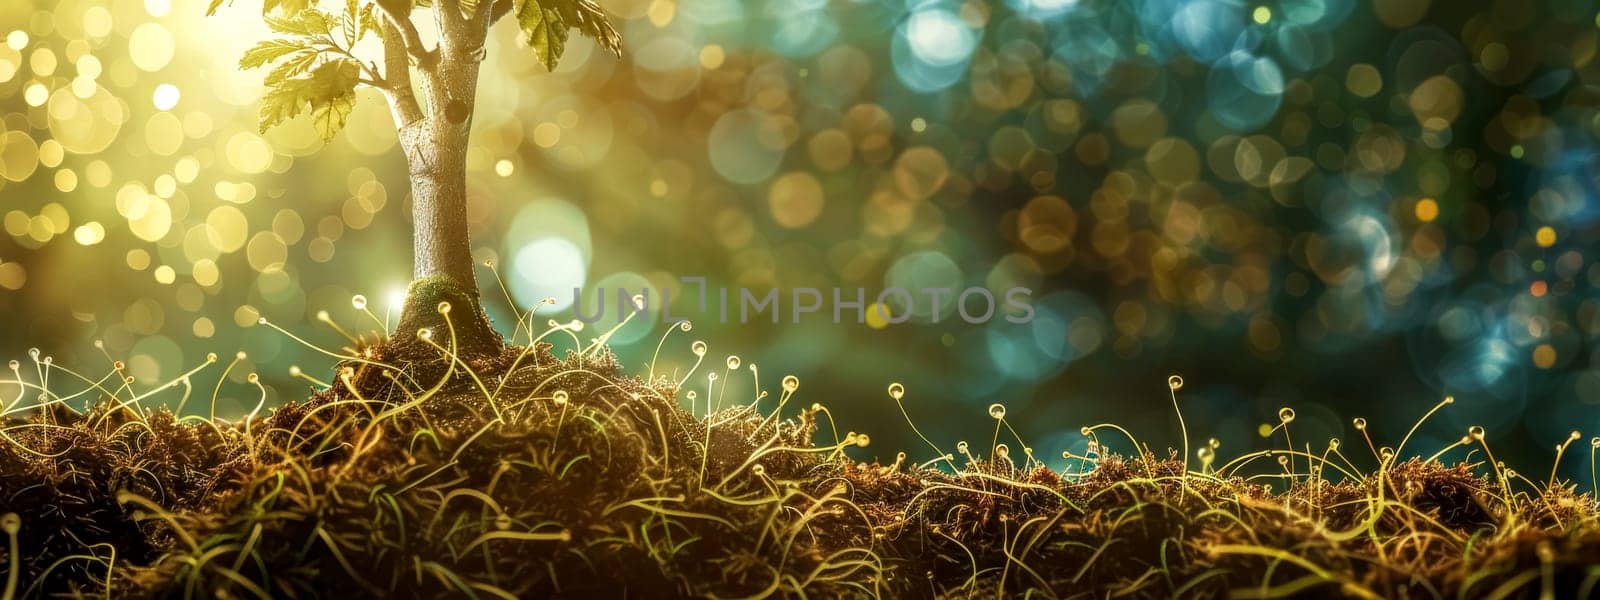 Magical bokeh lights behind a young tree surrounded by moss and fern